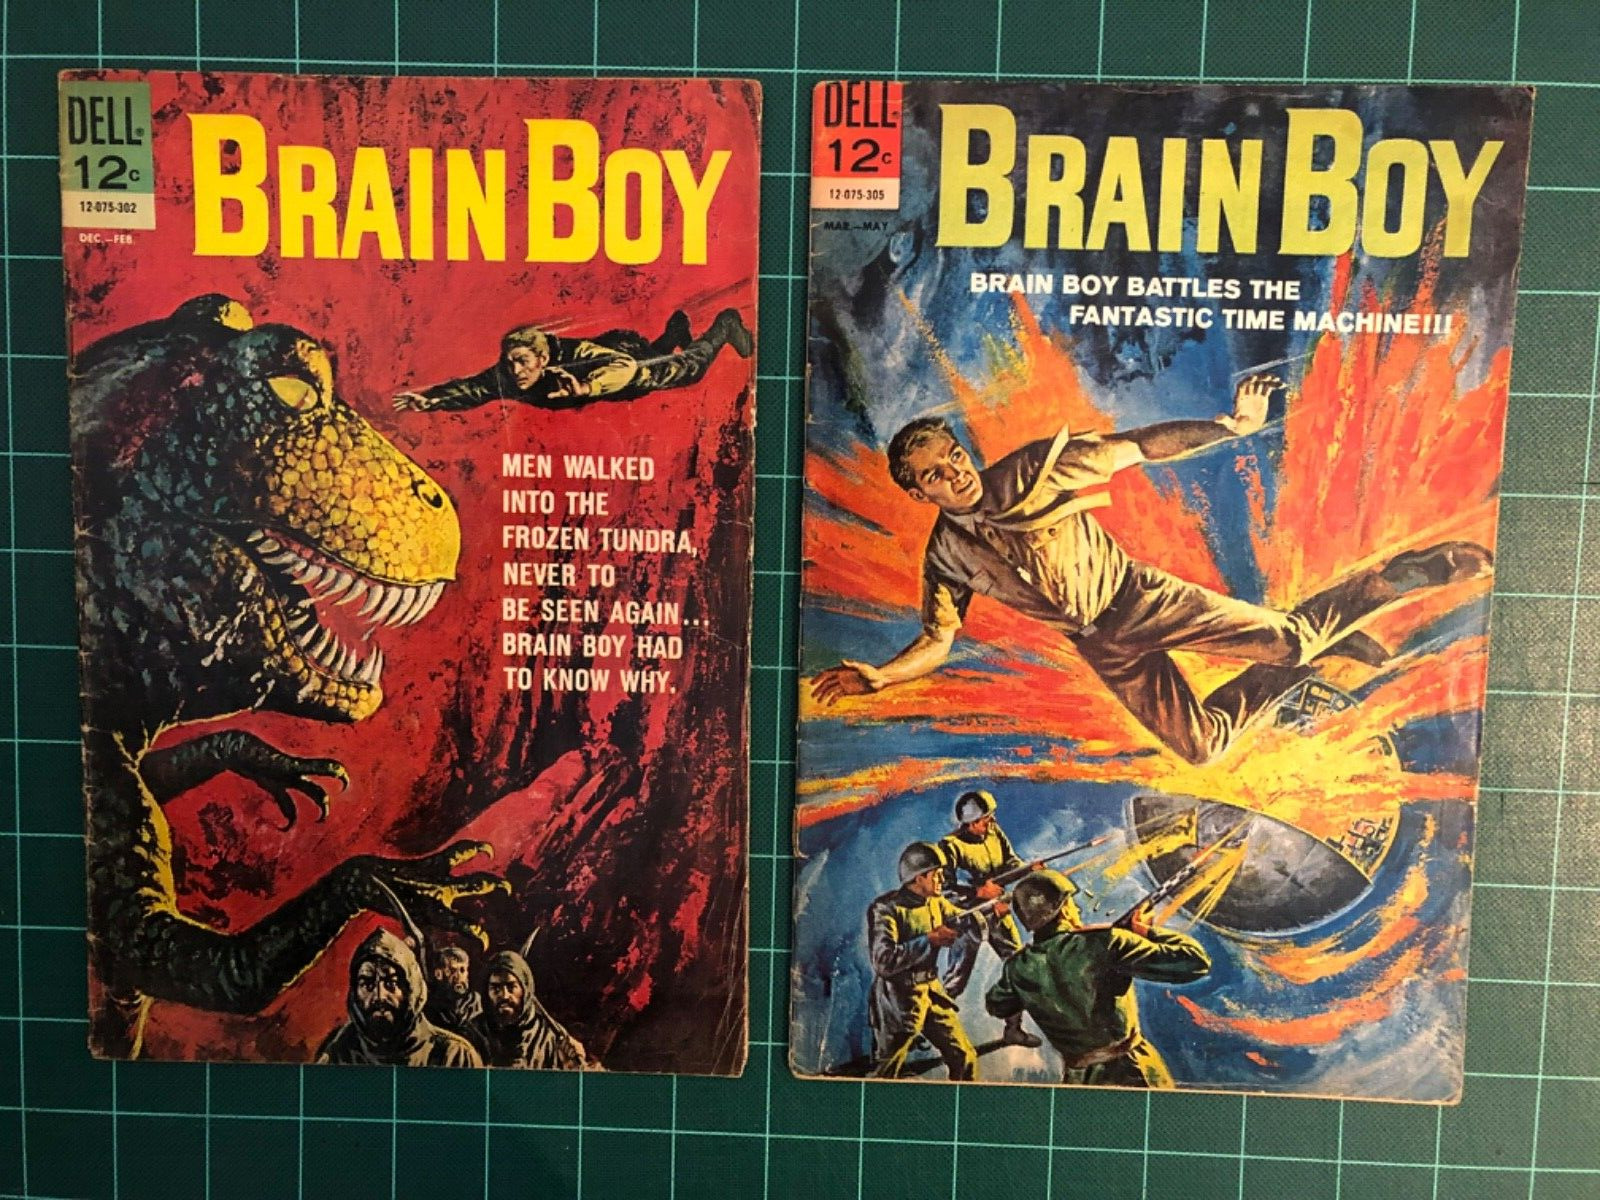 Brain Boy # 3, #4 - DELL COMICS 1963 - Bagged/Boarded - See Photos for Condition